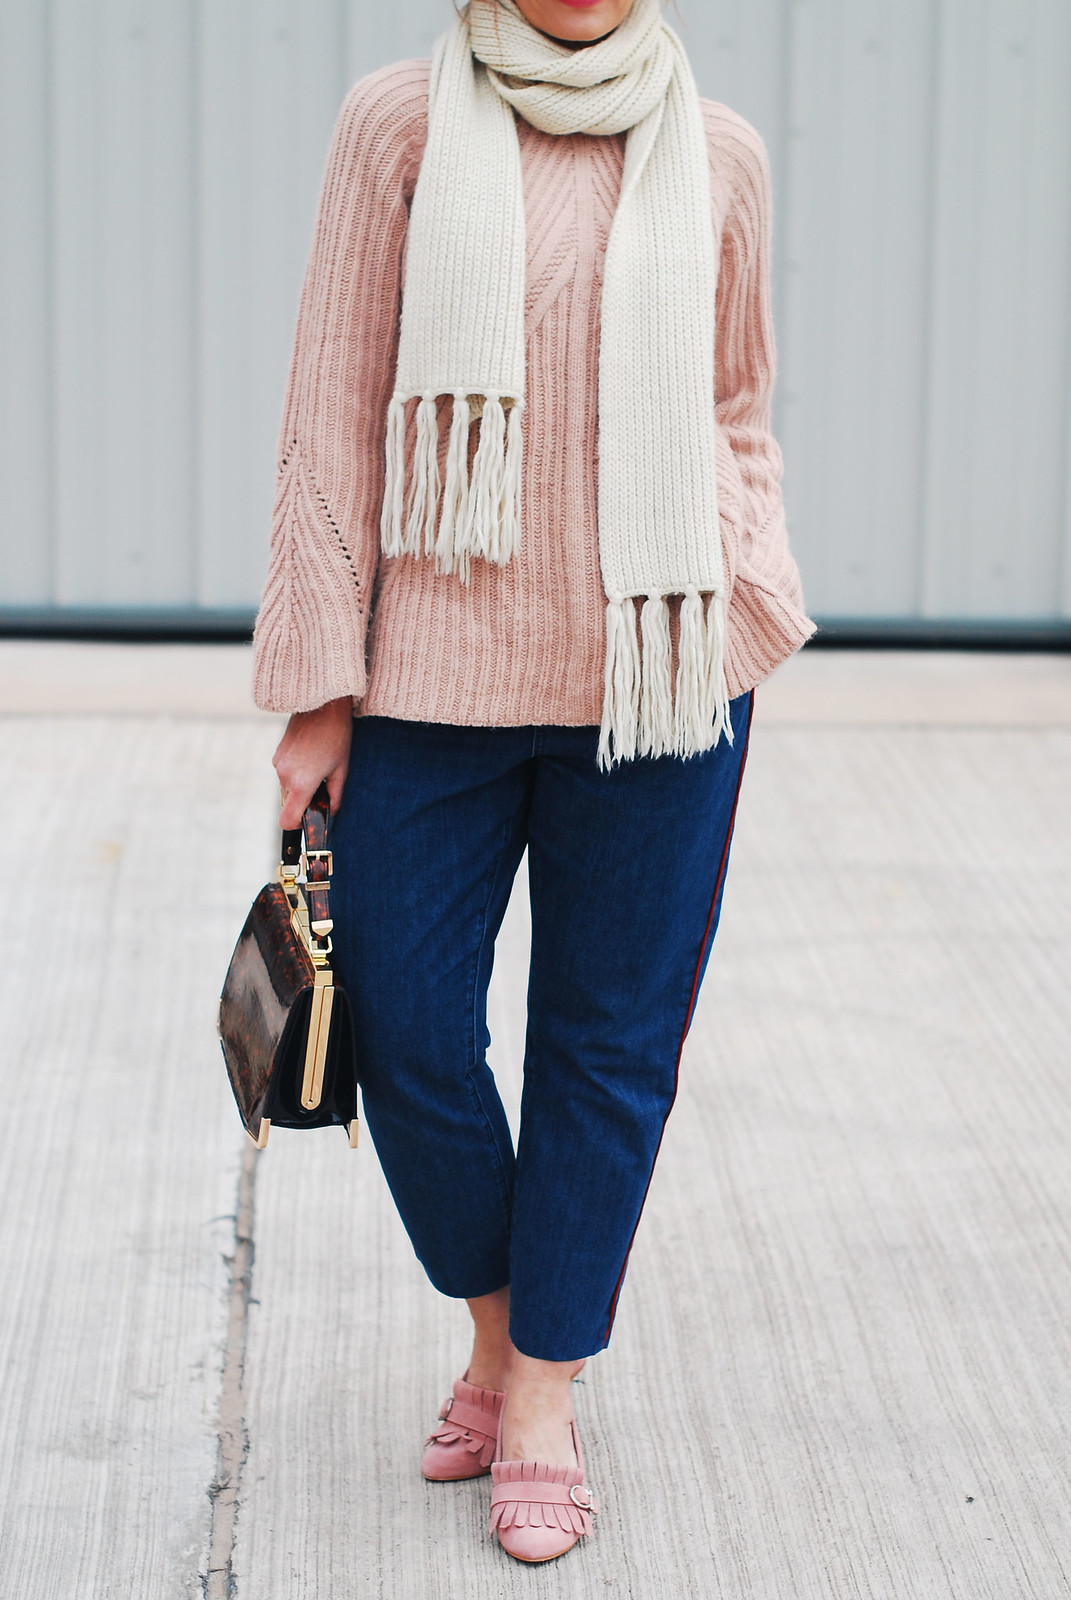 Casual autumn/fall outfit - Blush pink cable knit sweater, peg leg jeans, camel fedora, Gucci-inspired pink fringed block heel loafers, tortoiseshell handbag | Not Dressed As Lamb, over 40 style blog